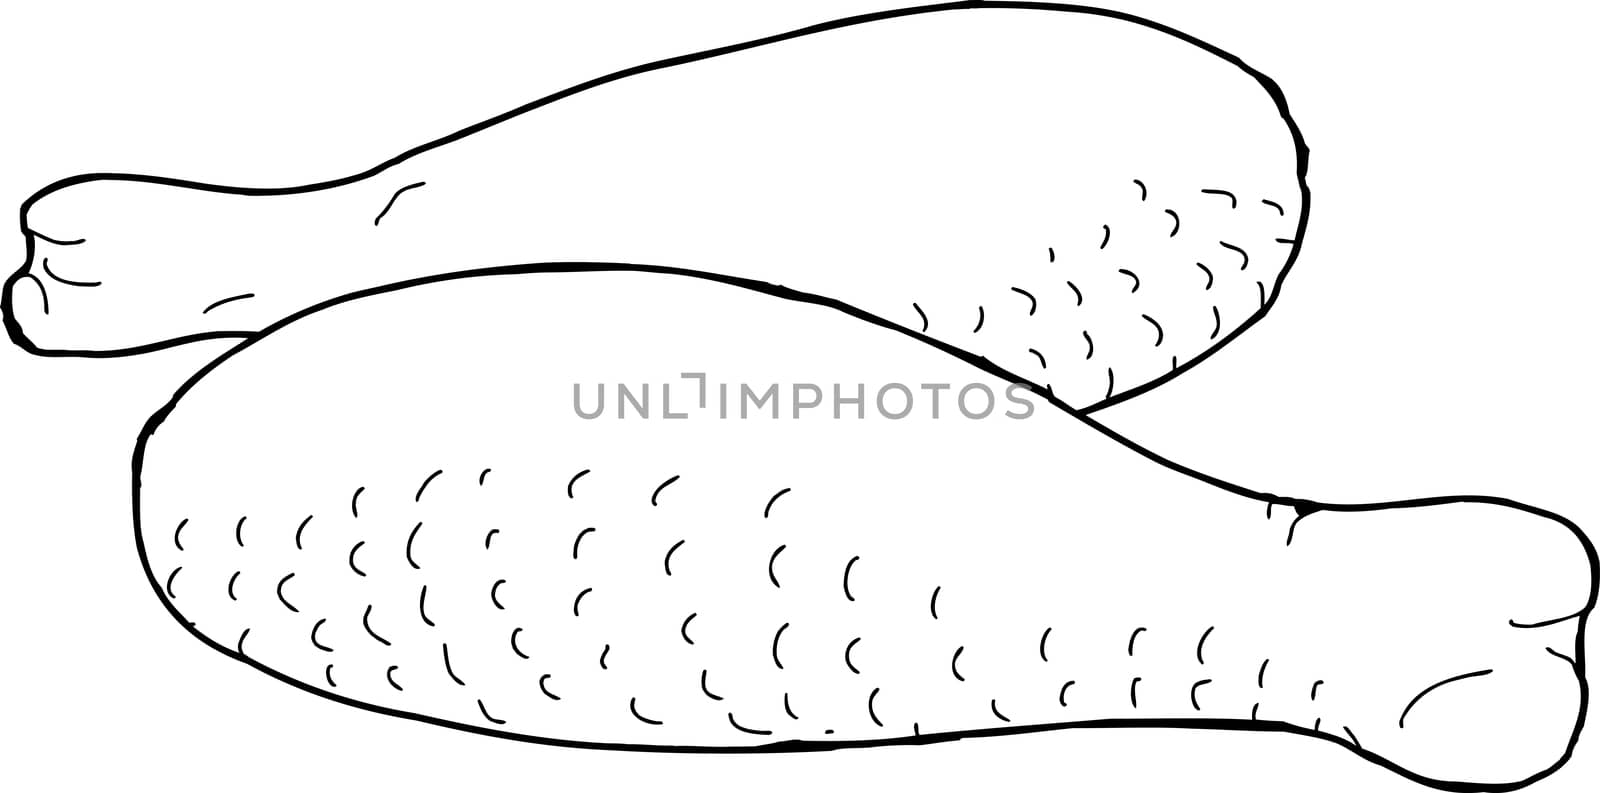 Pair of raw chicken legs as outline illustration